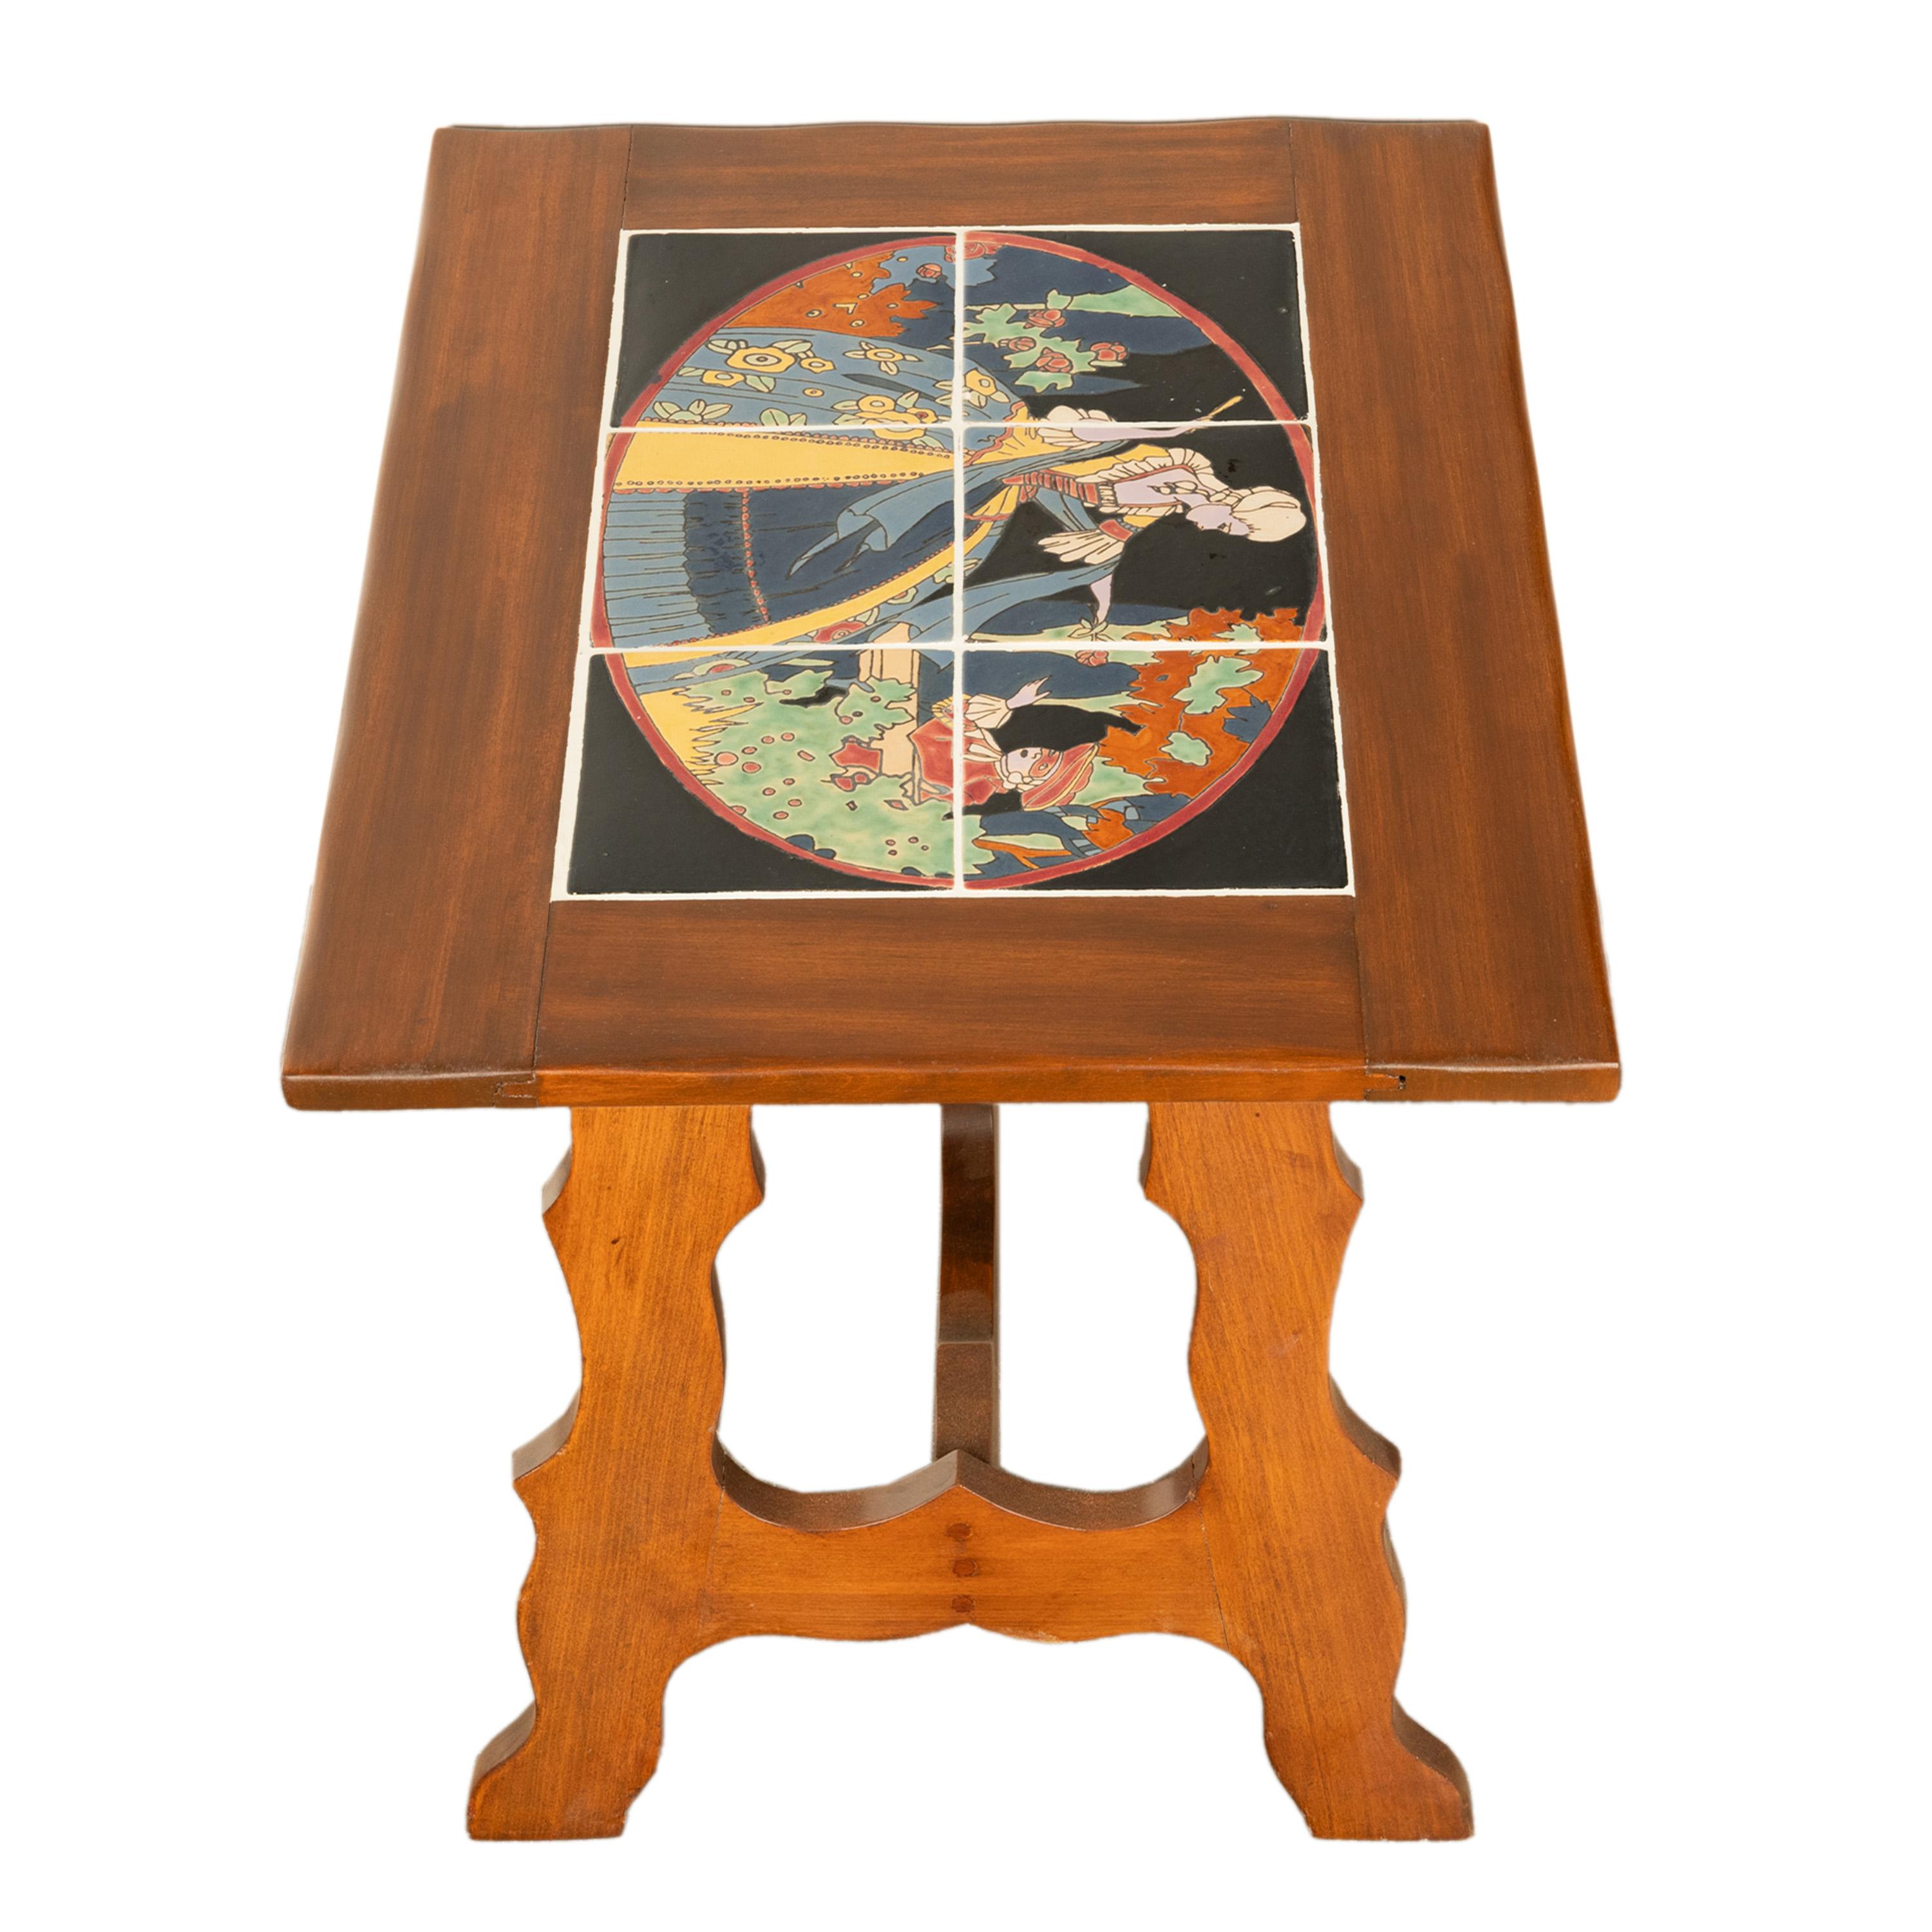 Antique Mission Catalina Monterrey California Tile Top Walnut Coffee Table 1930 For Sale 12